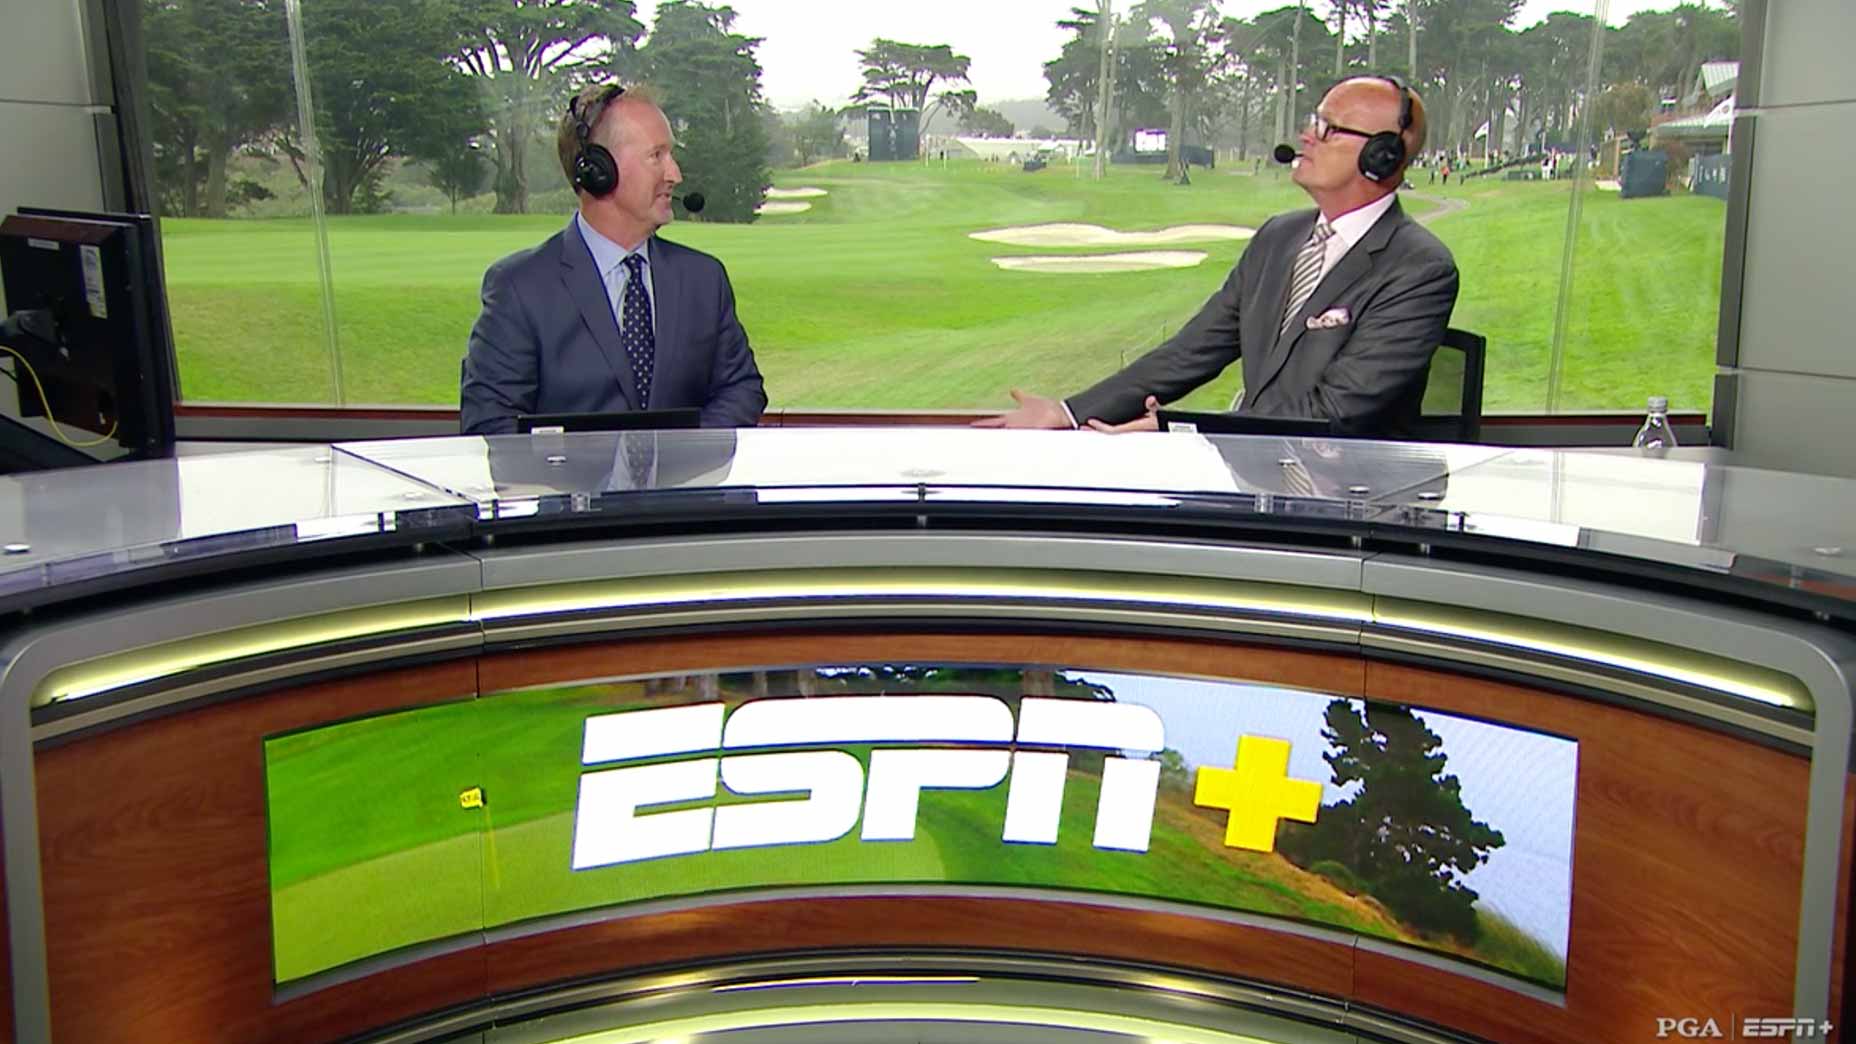 PGA Championship 2020 Why ESPNs blisteringly fast coverage is great